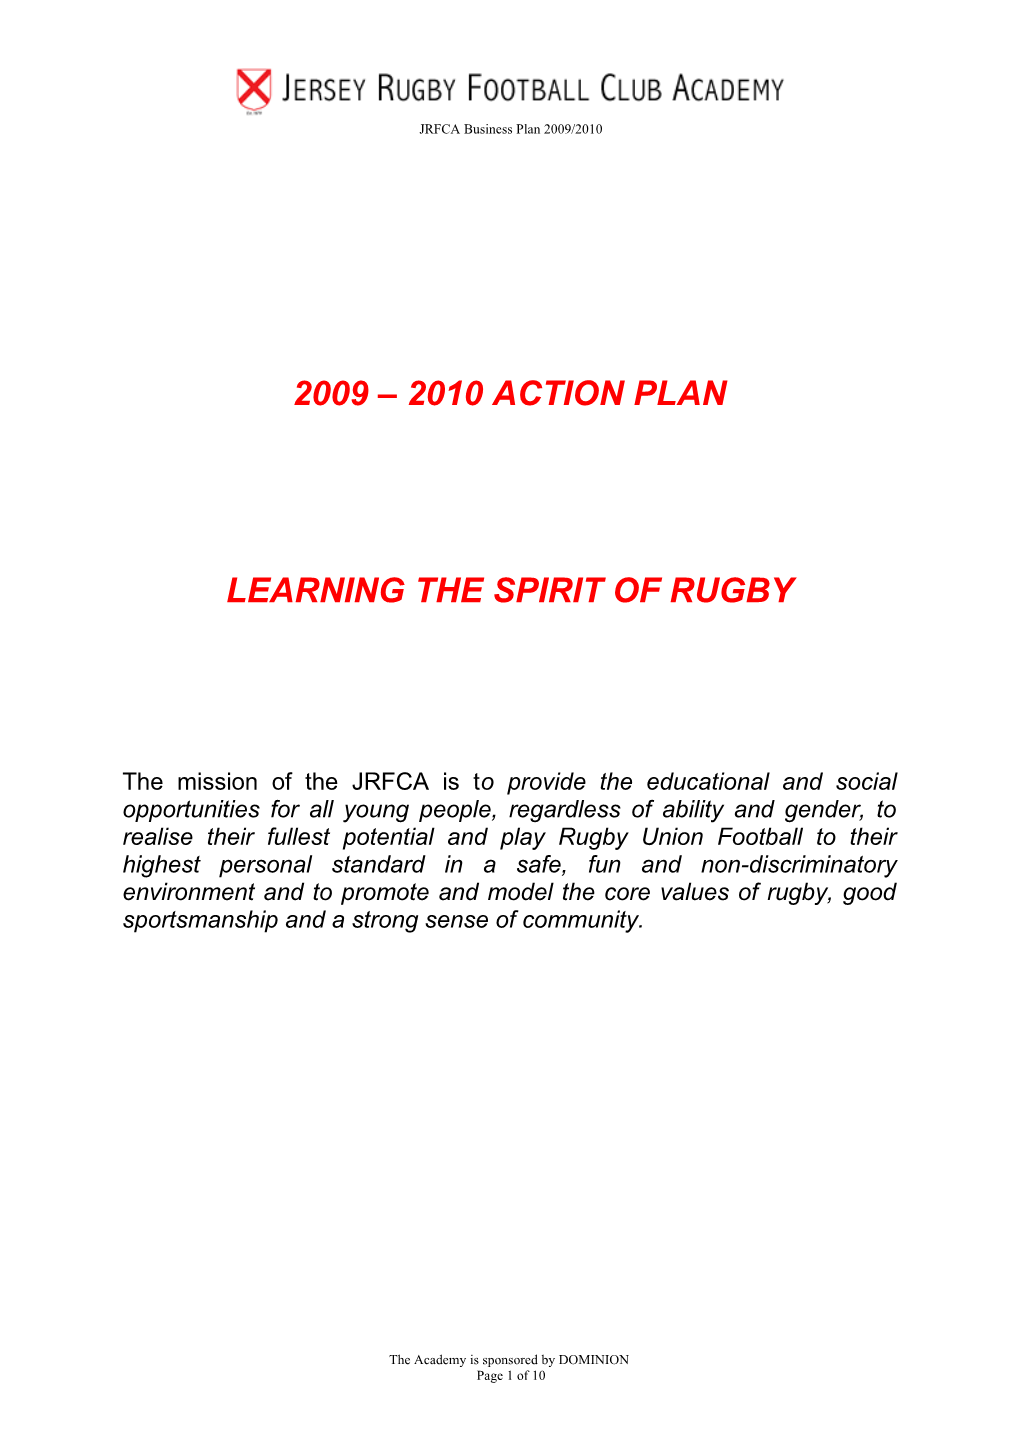 Learning the Spirit of Rugby